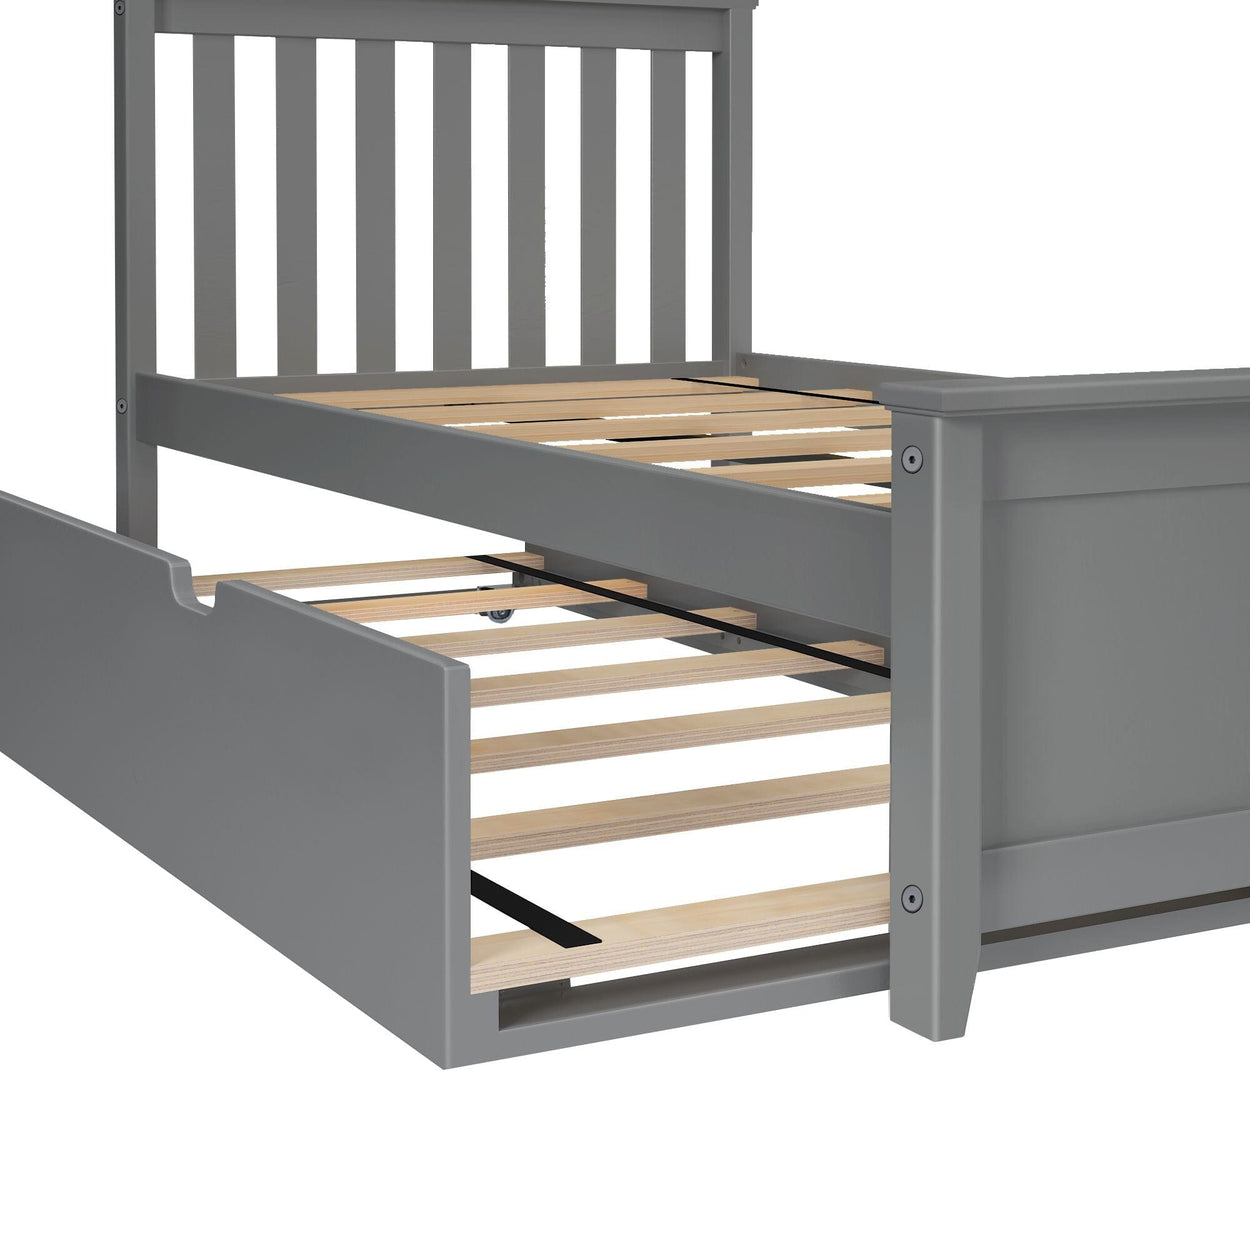 186210-121 : Kids Beds Twin-Size Bed with Trundle, Grey